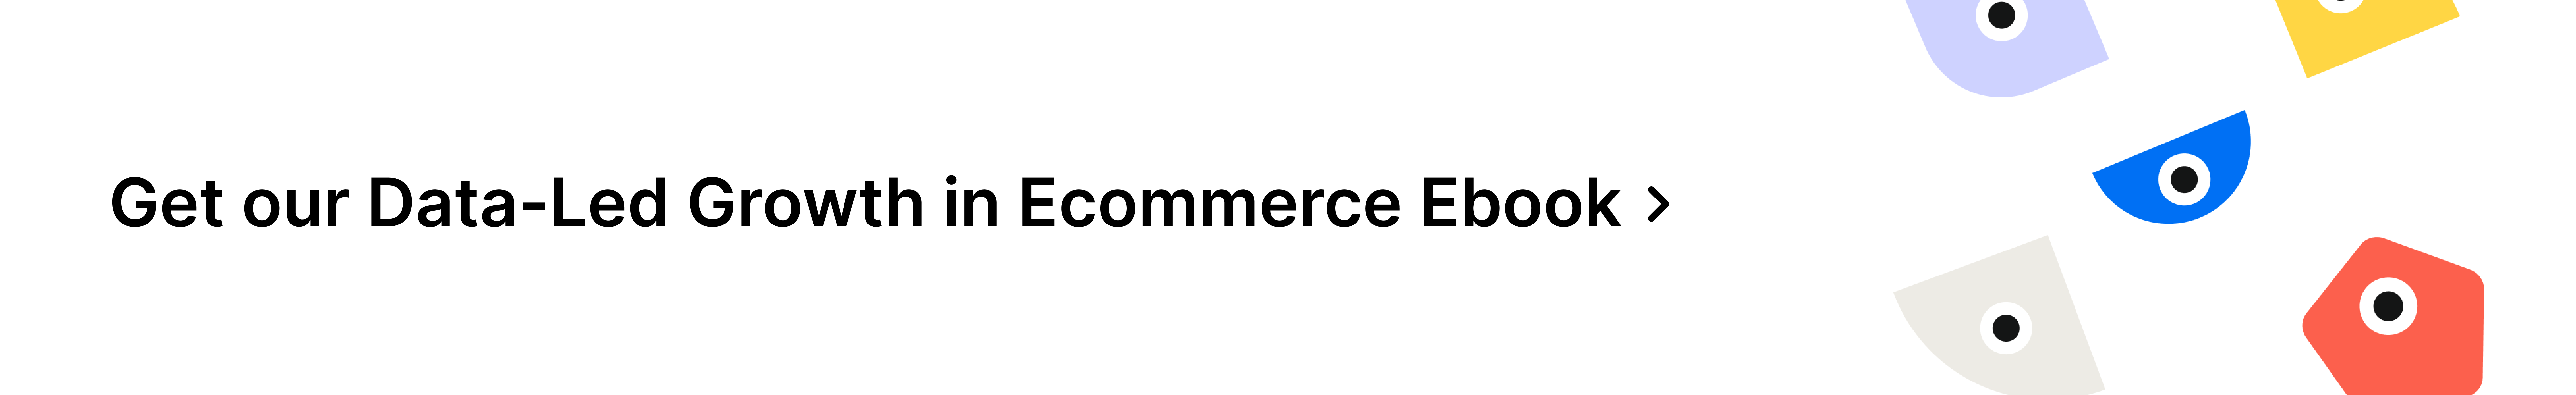 Get our Data-Led Growth in Ecommerce Ebook